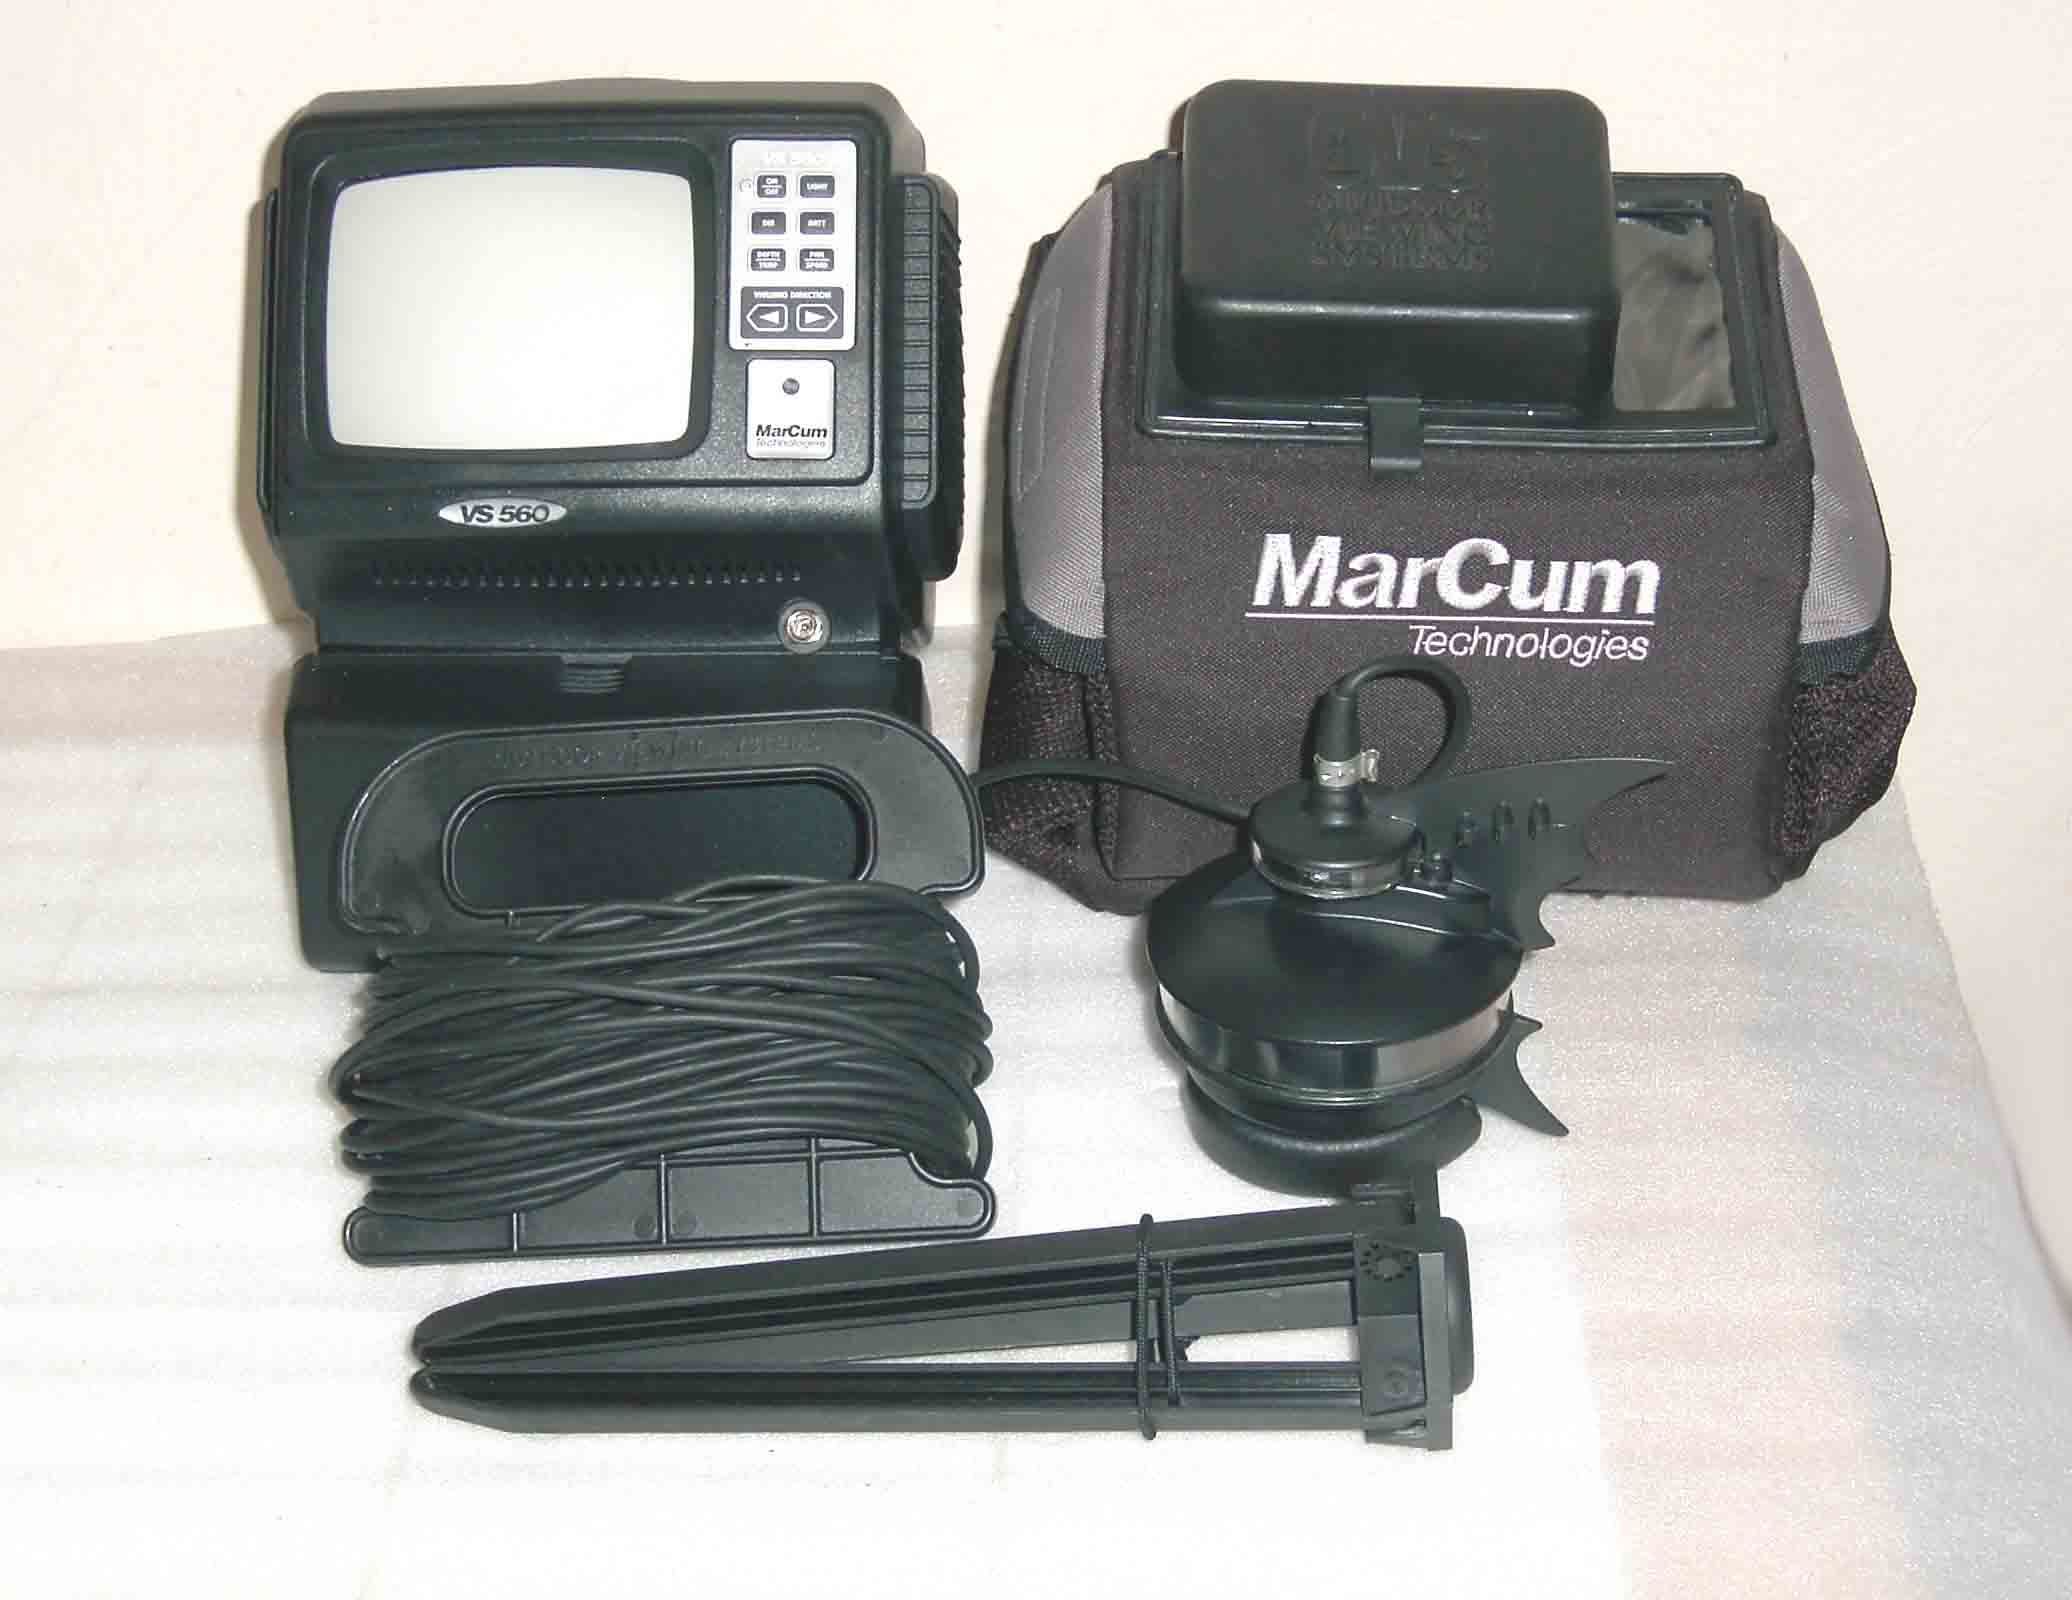 Marcum Technologies VS 560 Underwater Camera and Monitor - Classified Ads -  Classified Ads